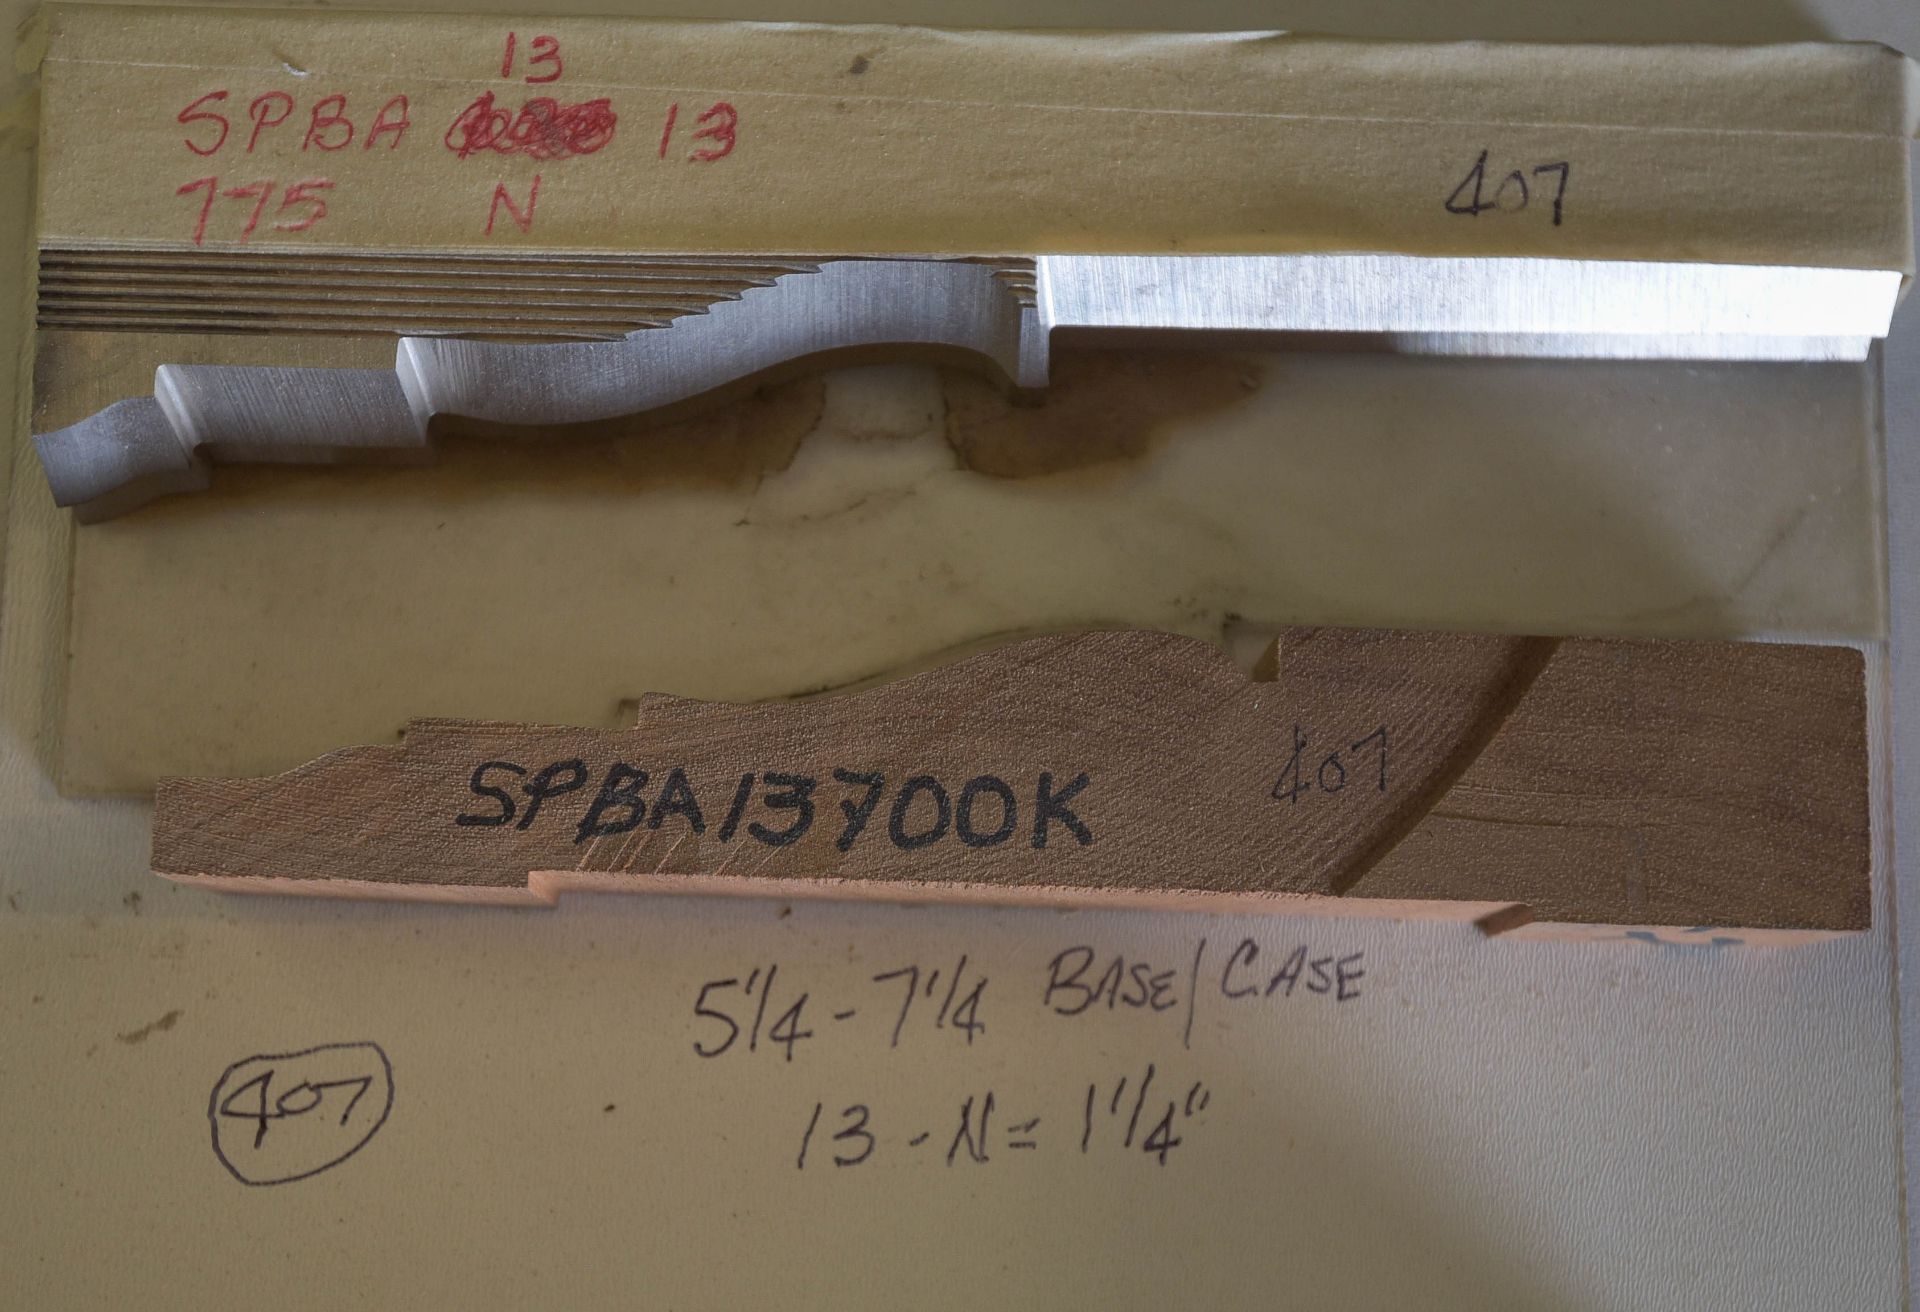 Moulding Knives, 5-1/4" - 7-1/4" Base/Case, 13-N = 1-1/4", Knives are in Good Condition and Ready